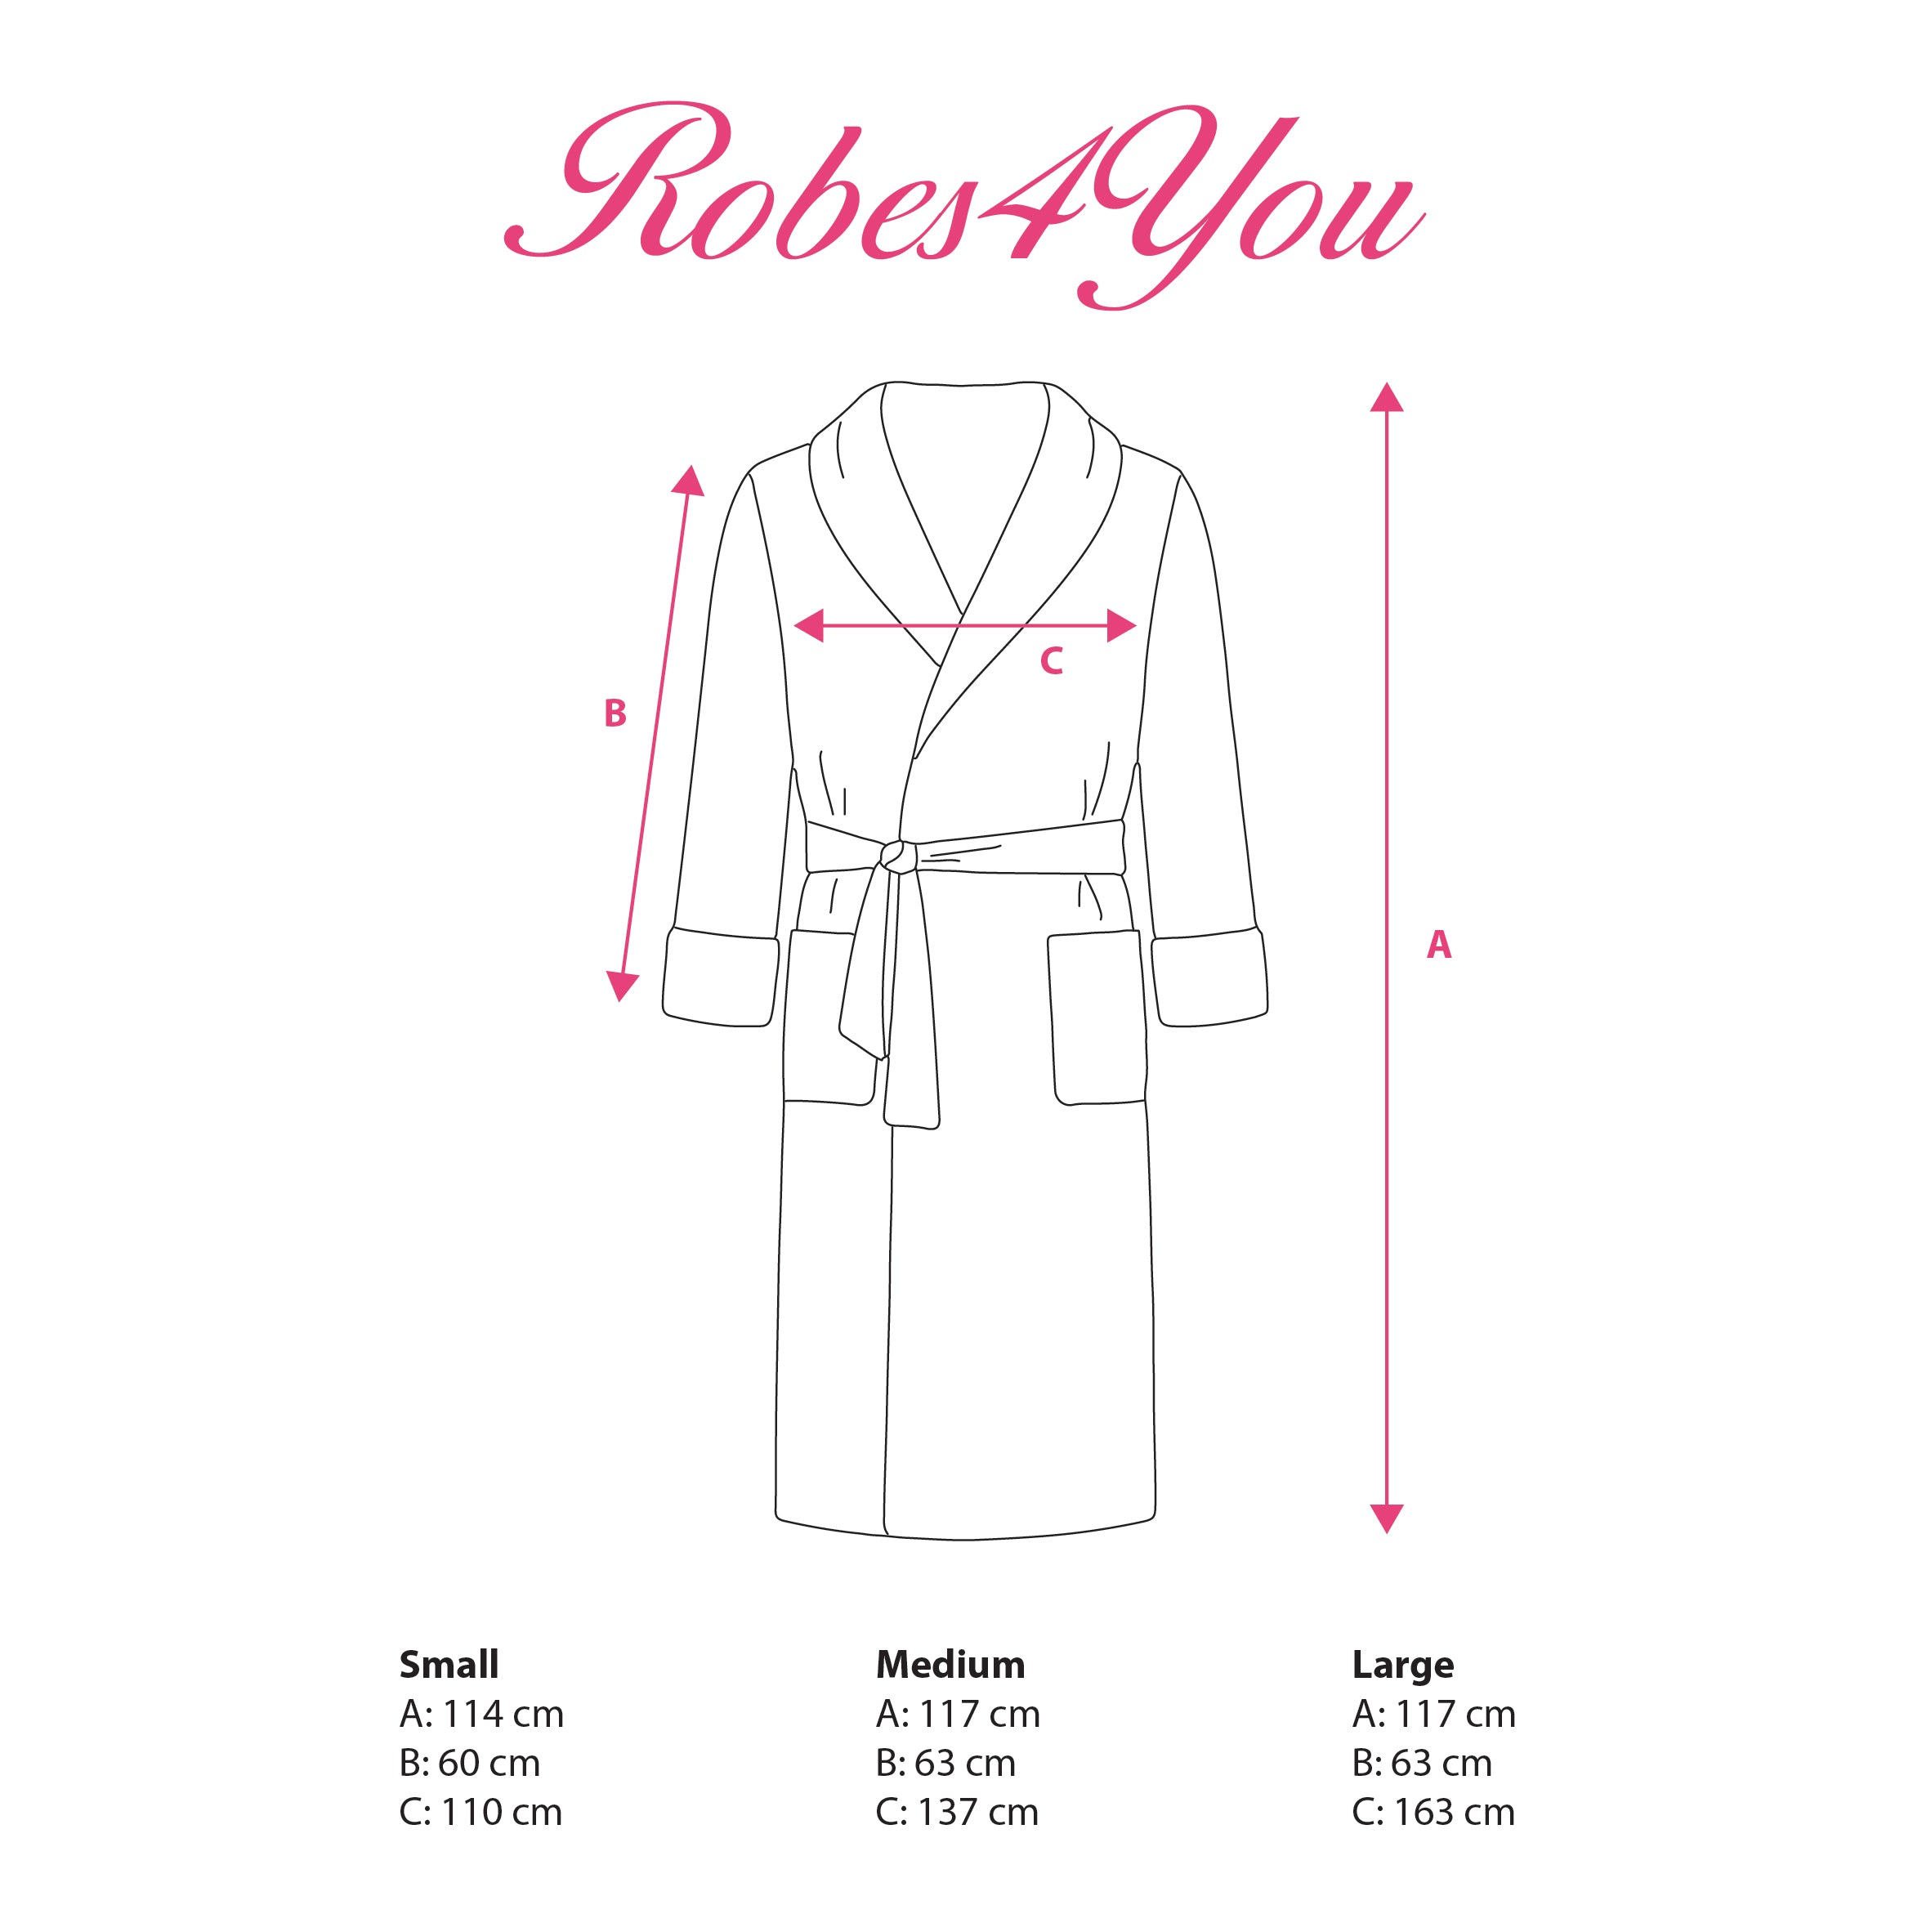 Adult robes sizing-Robes4you